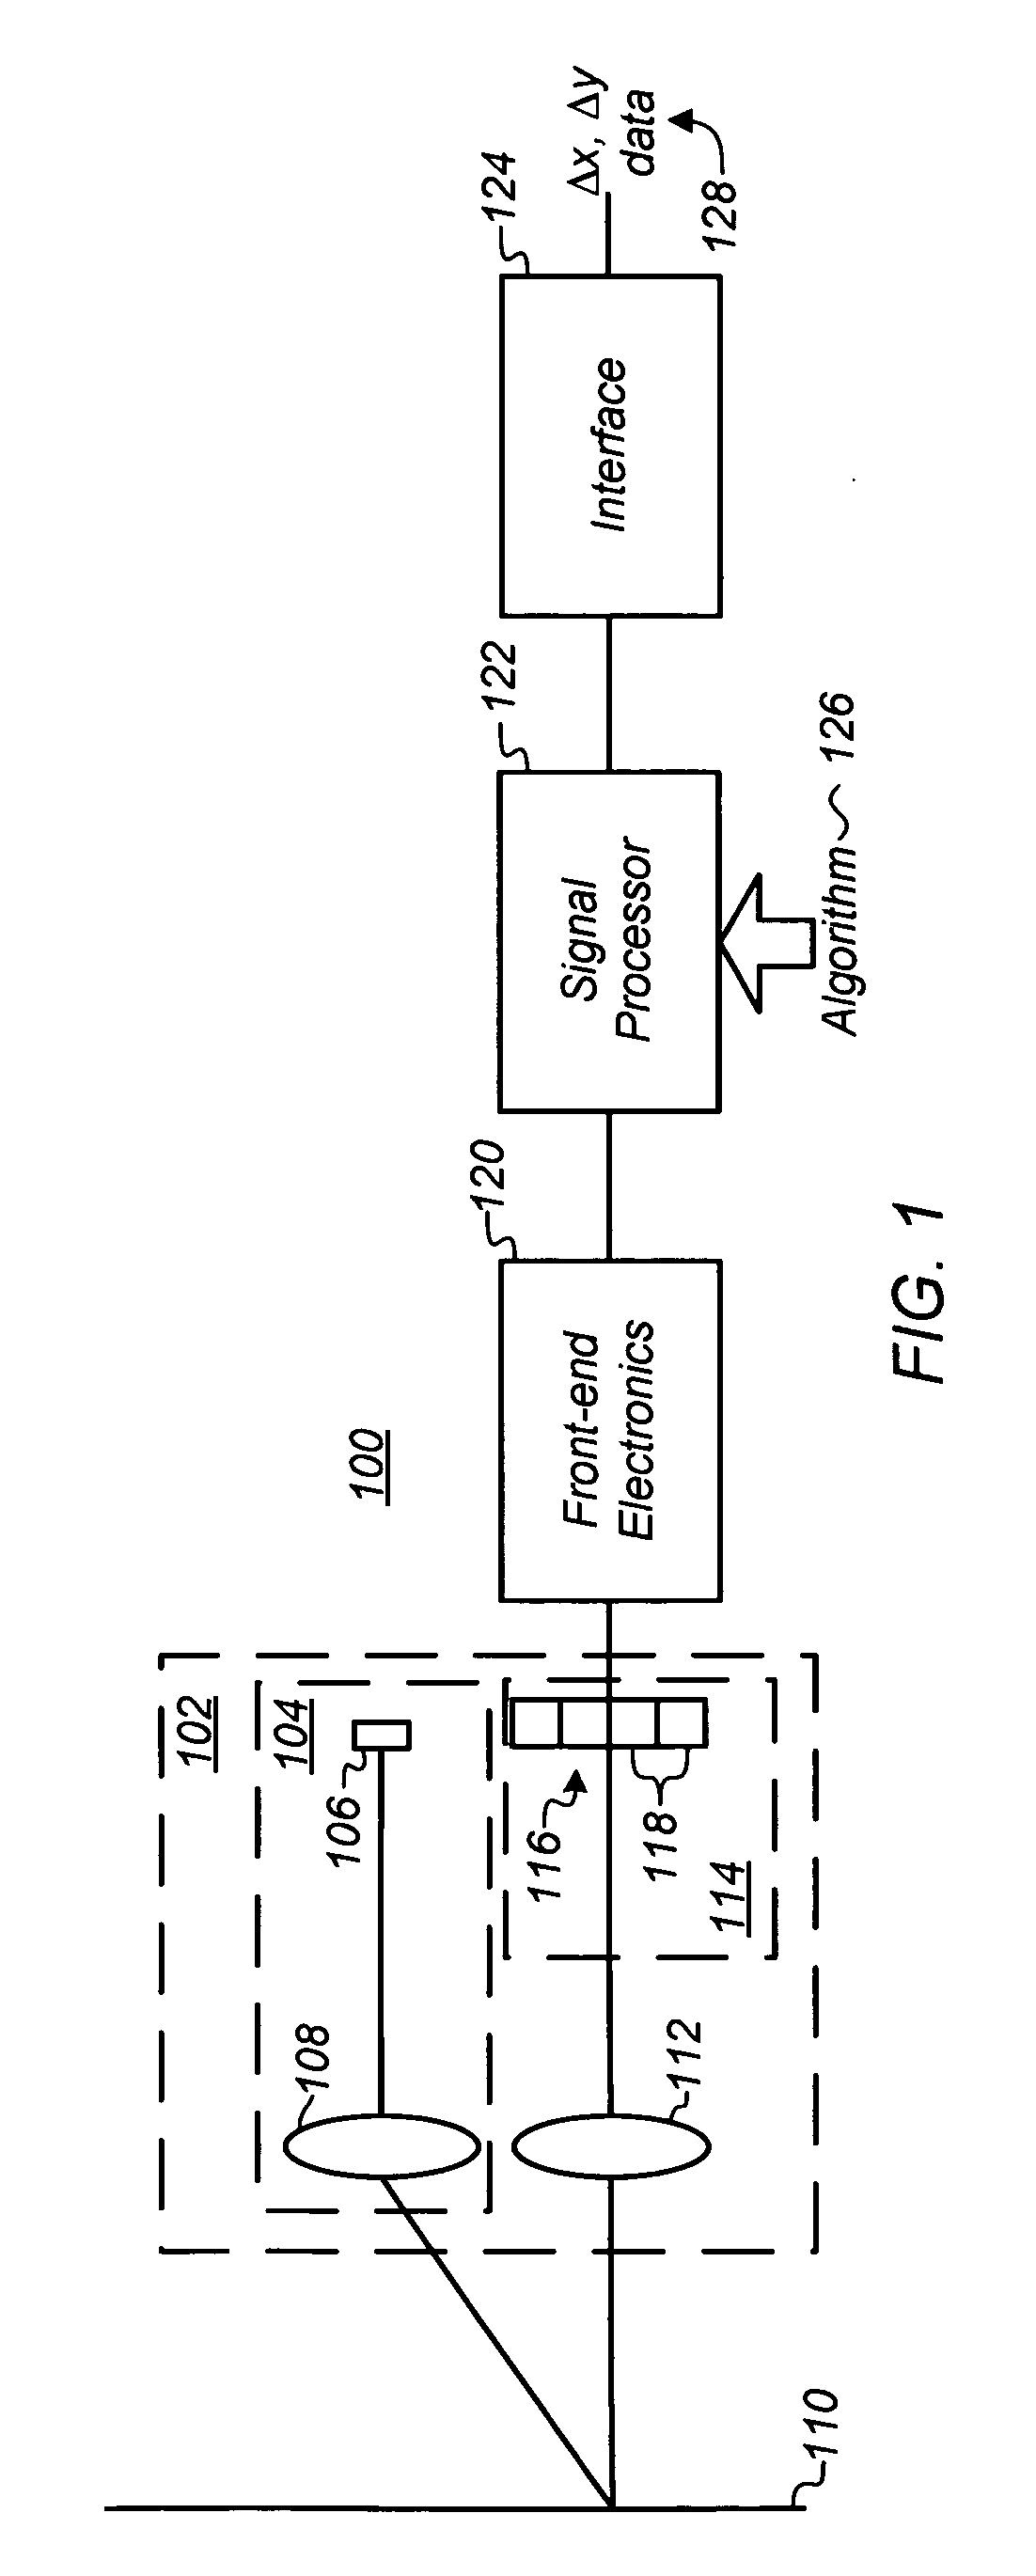 Circuit and method for reducing power consumption in an optical navigation system having redundant arrays